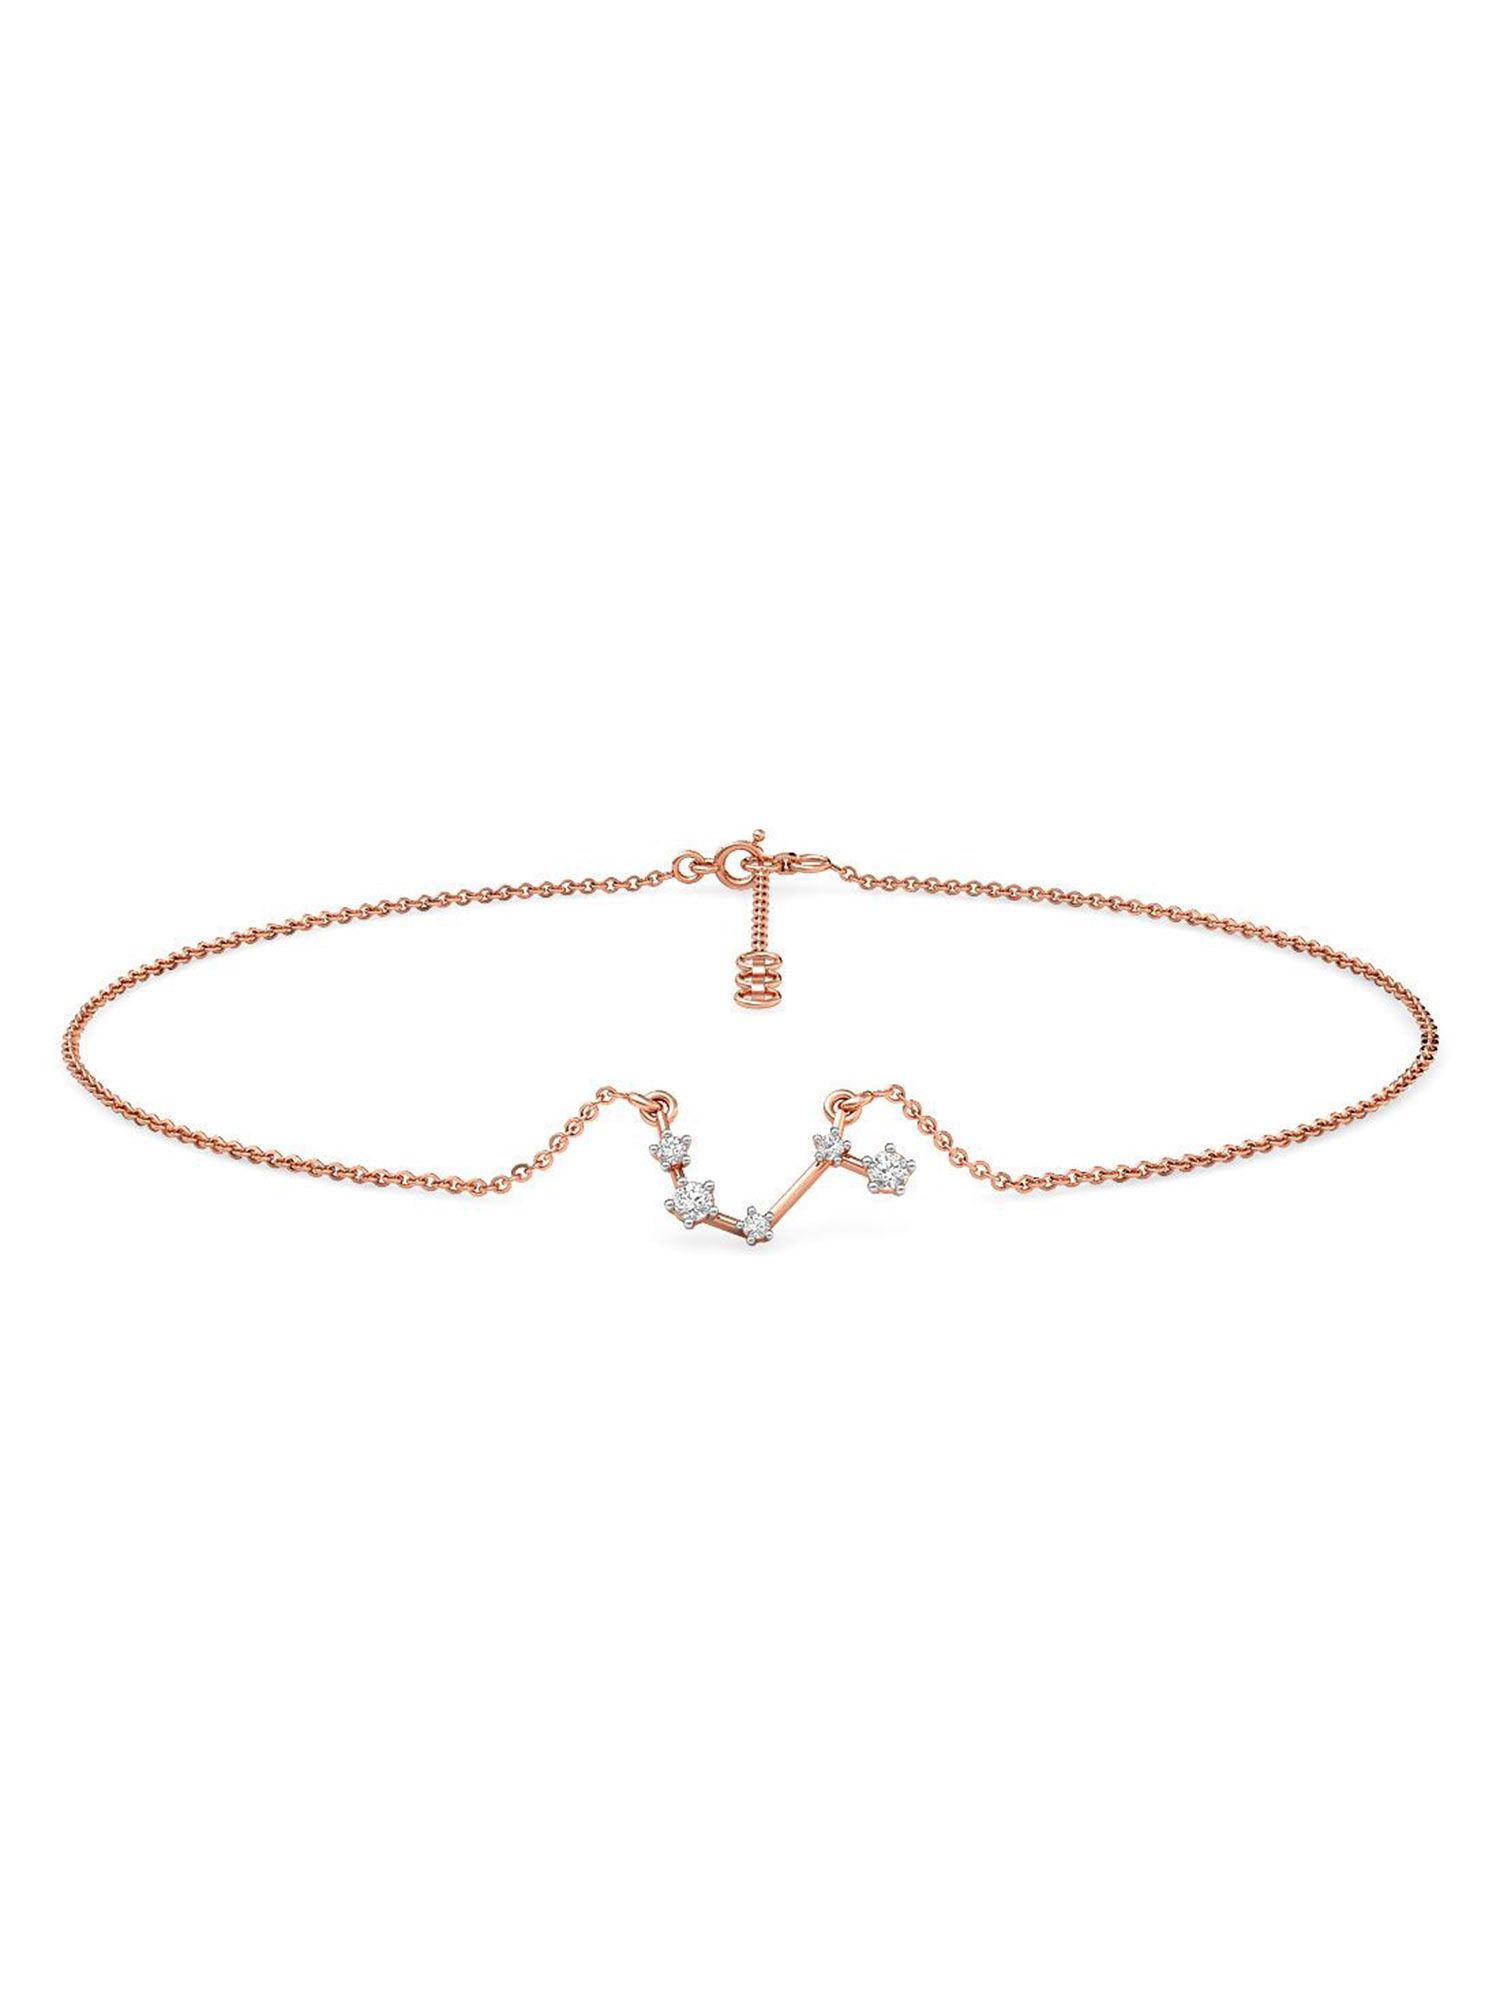 aries 14k rose gold and diamond anklet for women